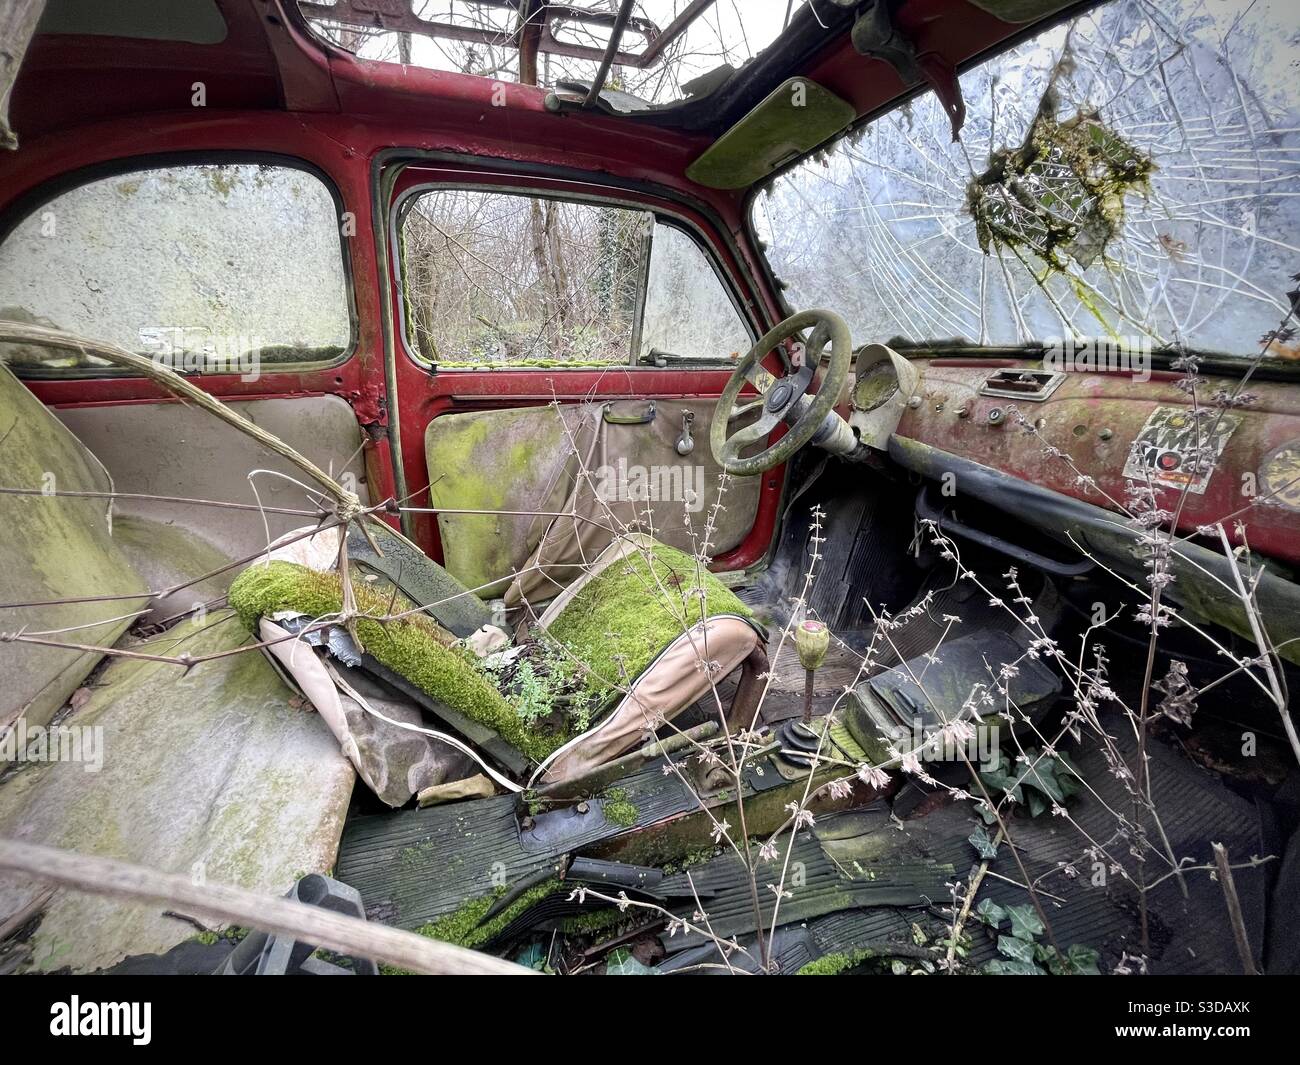 Interior of an old Fiat 500 car abandoned in a rural area in Tuscany Stock Photo